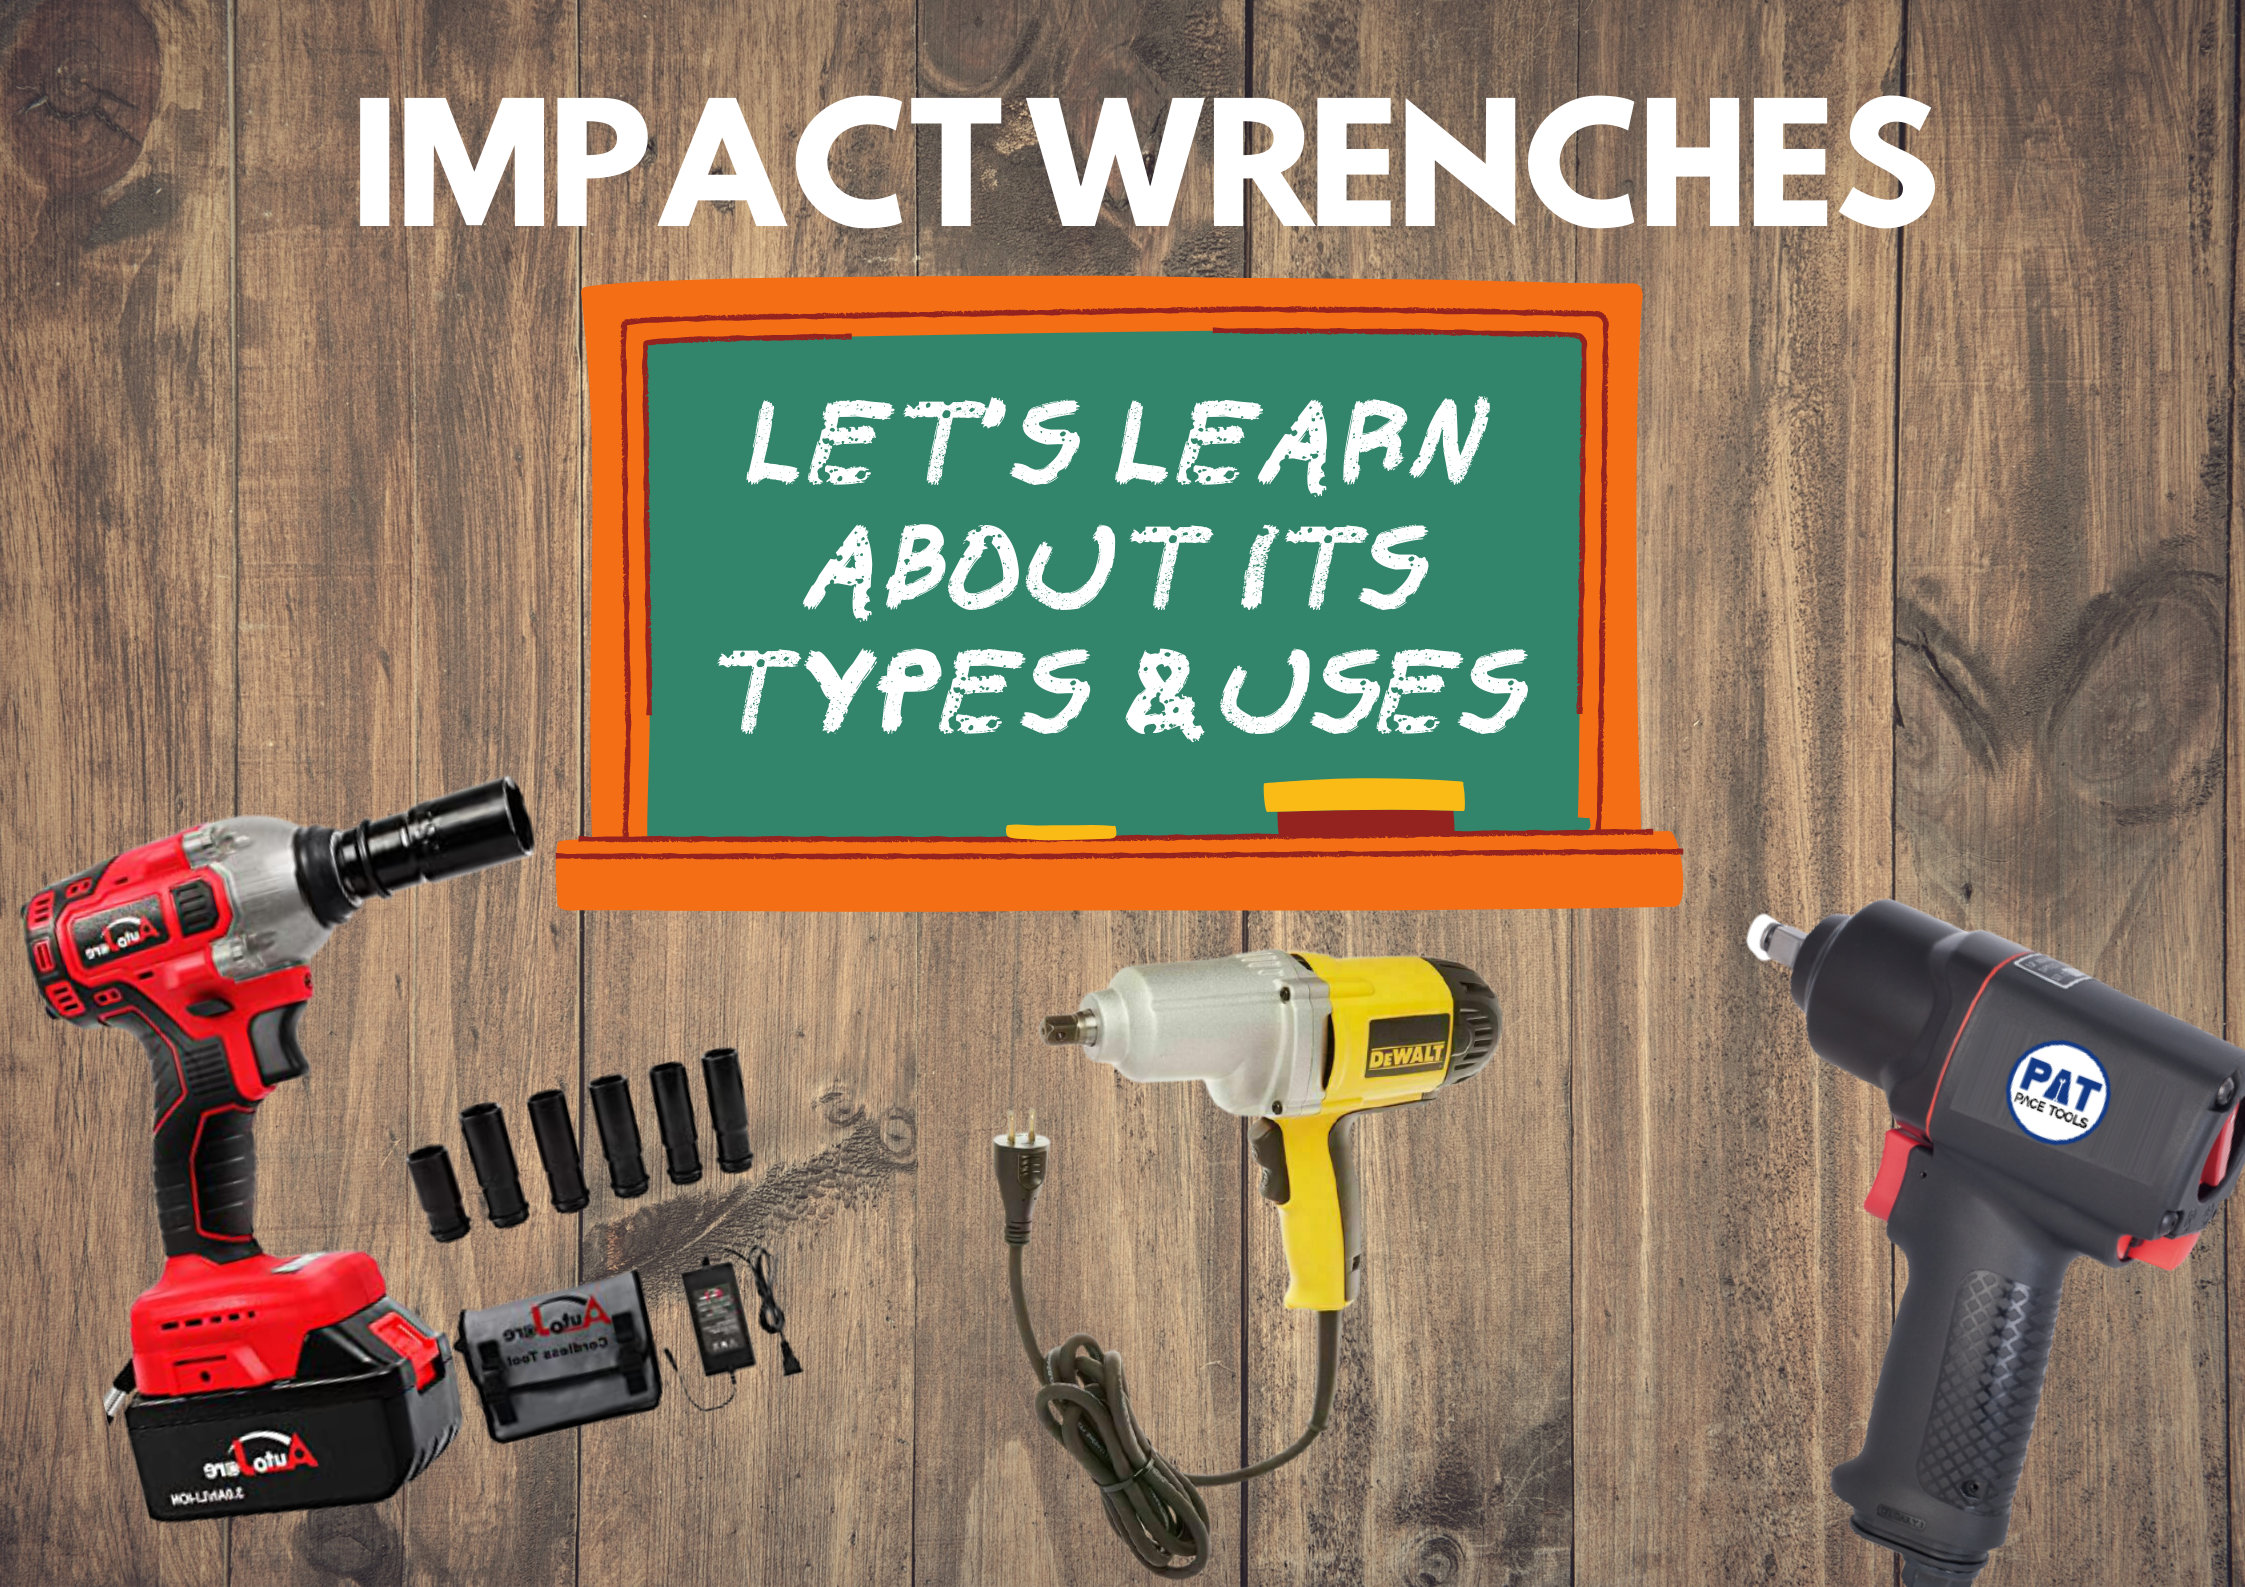 https://www.paceassemblytools.com/blog/wp-content/uploads/2021/09/Impact-Wrenches.png